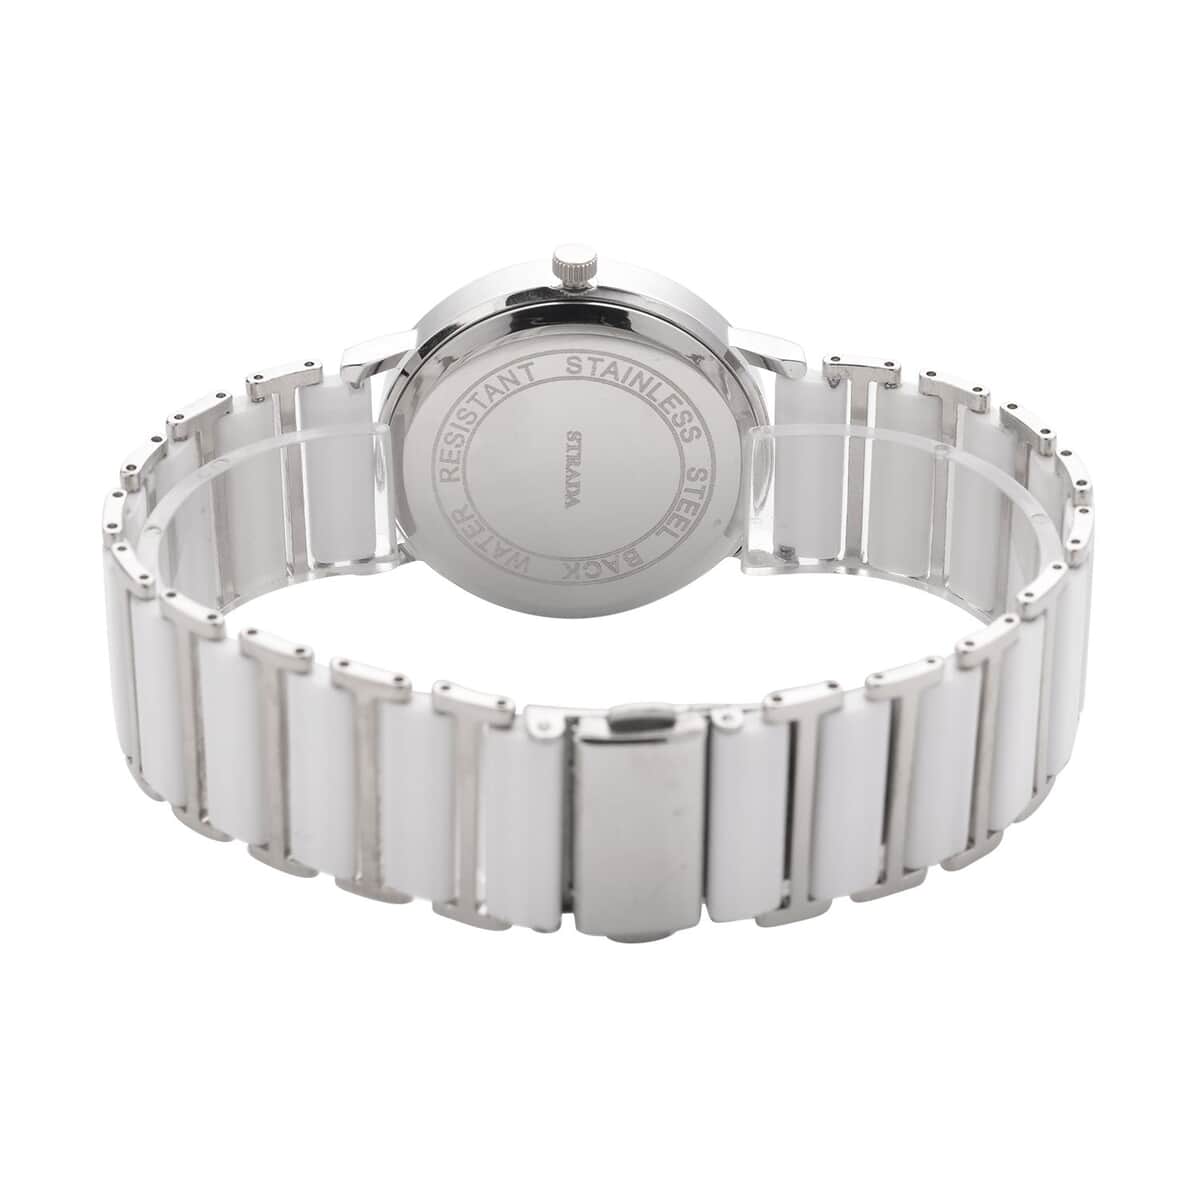 Strada Austrian Crystal Japanese Movement Watch with White Color Ceramic Strap (35.5mm) (6.0-7.0Inches) image number 5